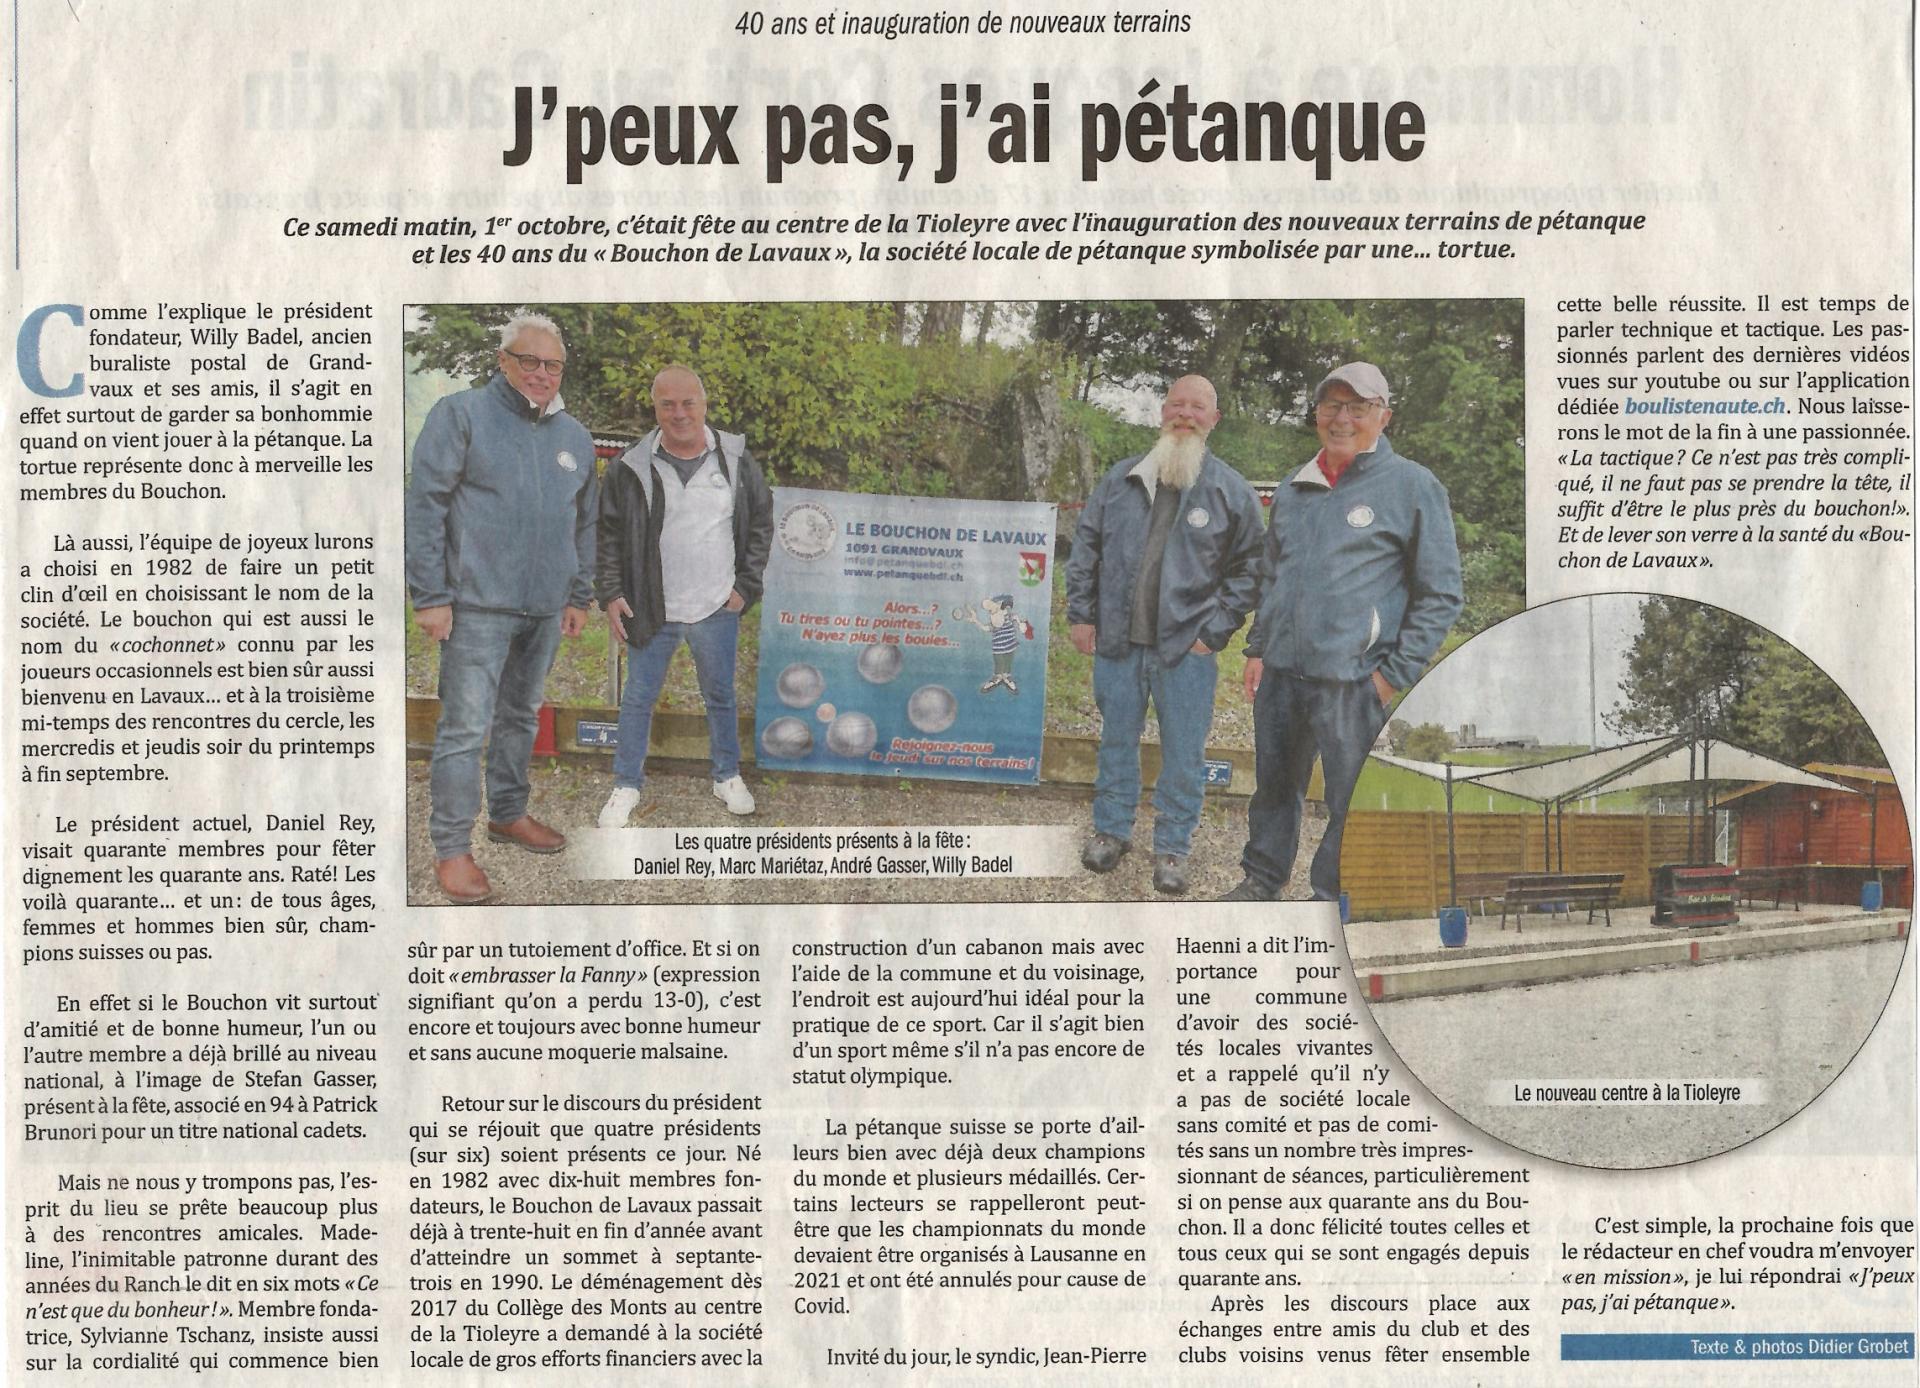 Article journal d oron